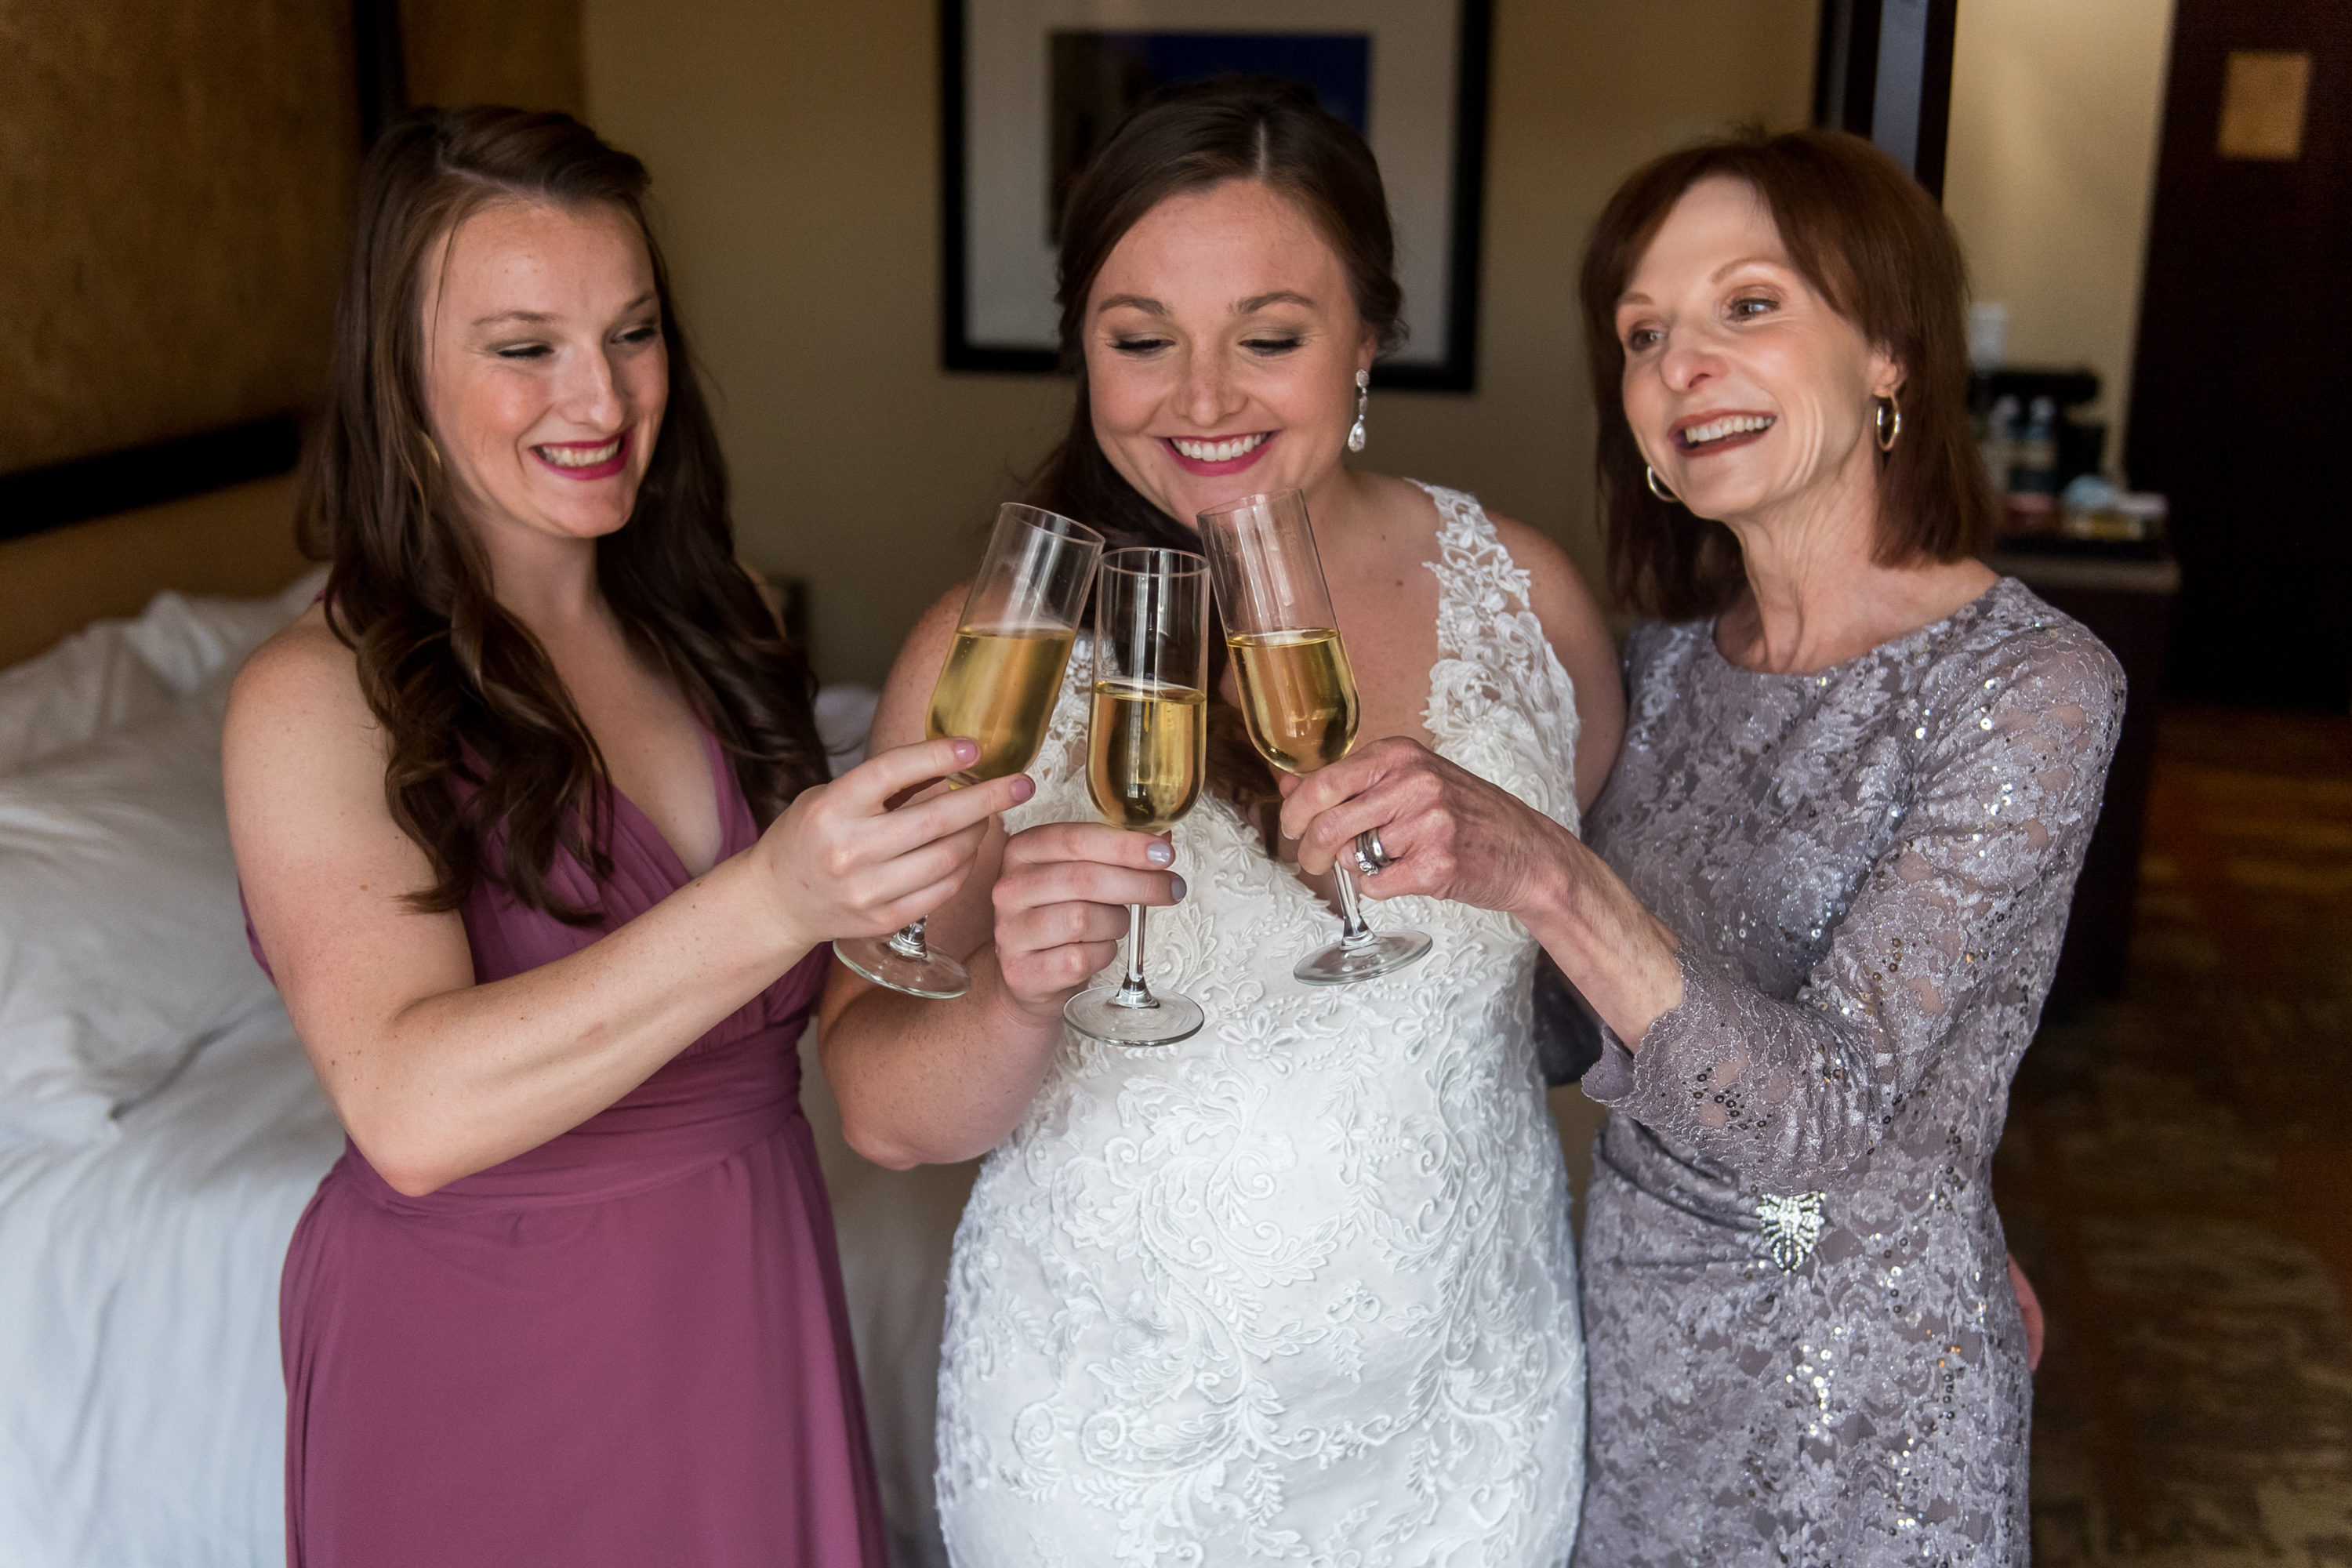 The bride, maid of honor and mother toast in their hotel room during a Greenbriar Inn wedding in Boulder, Colorado.